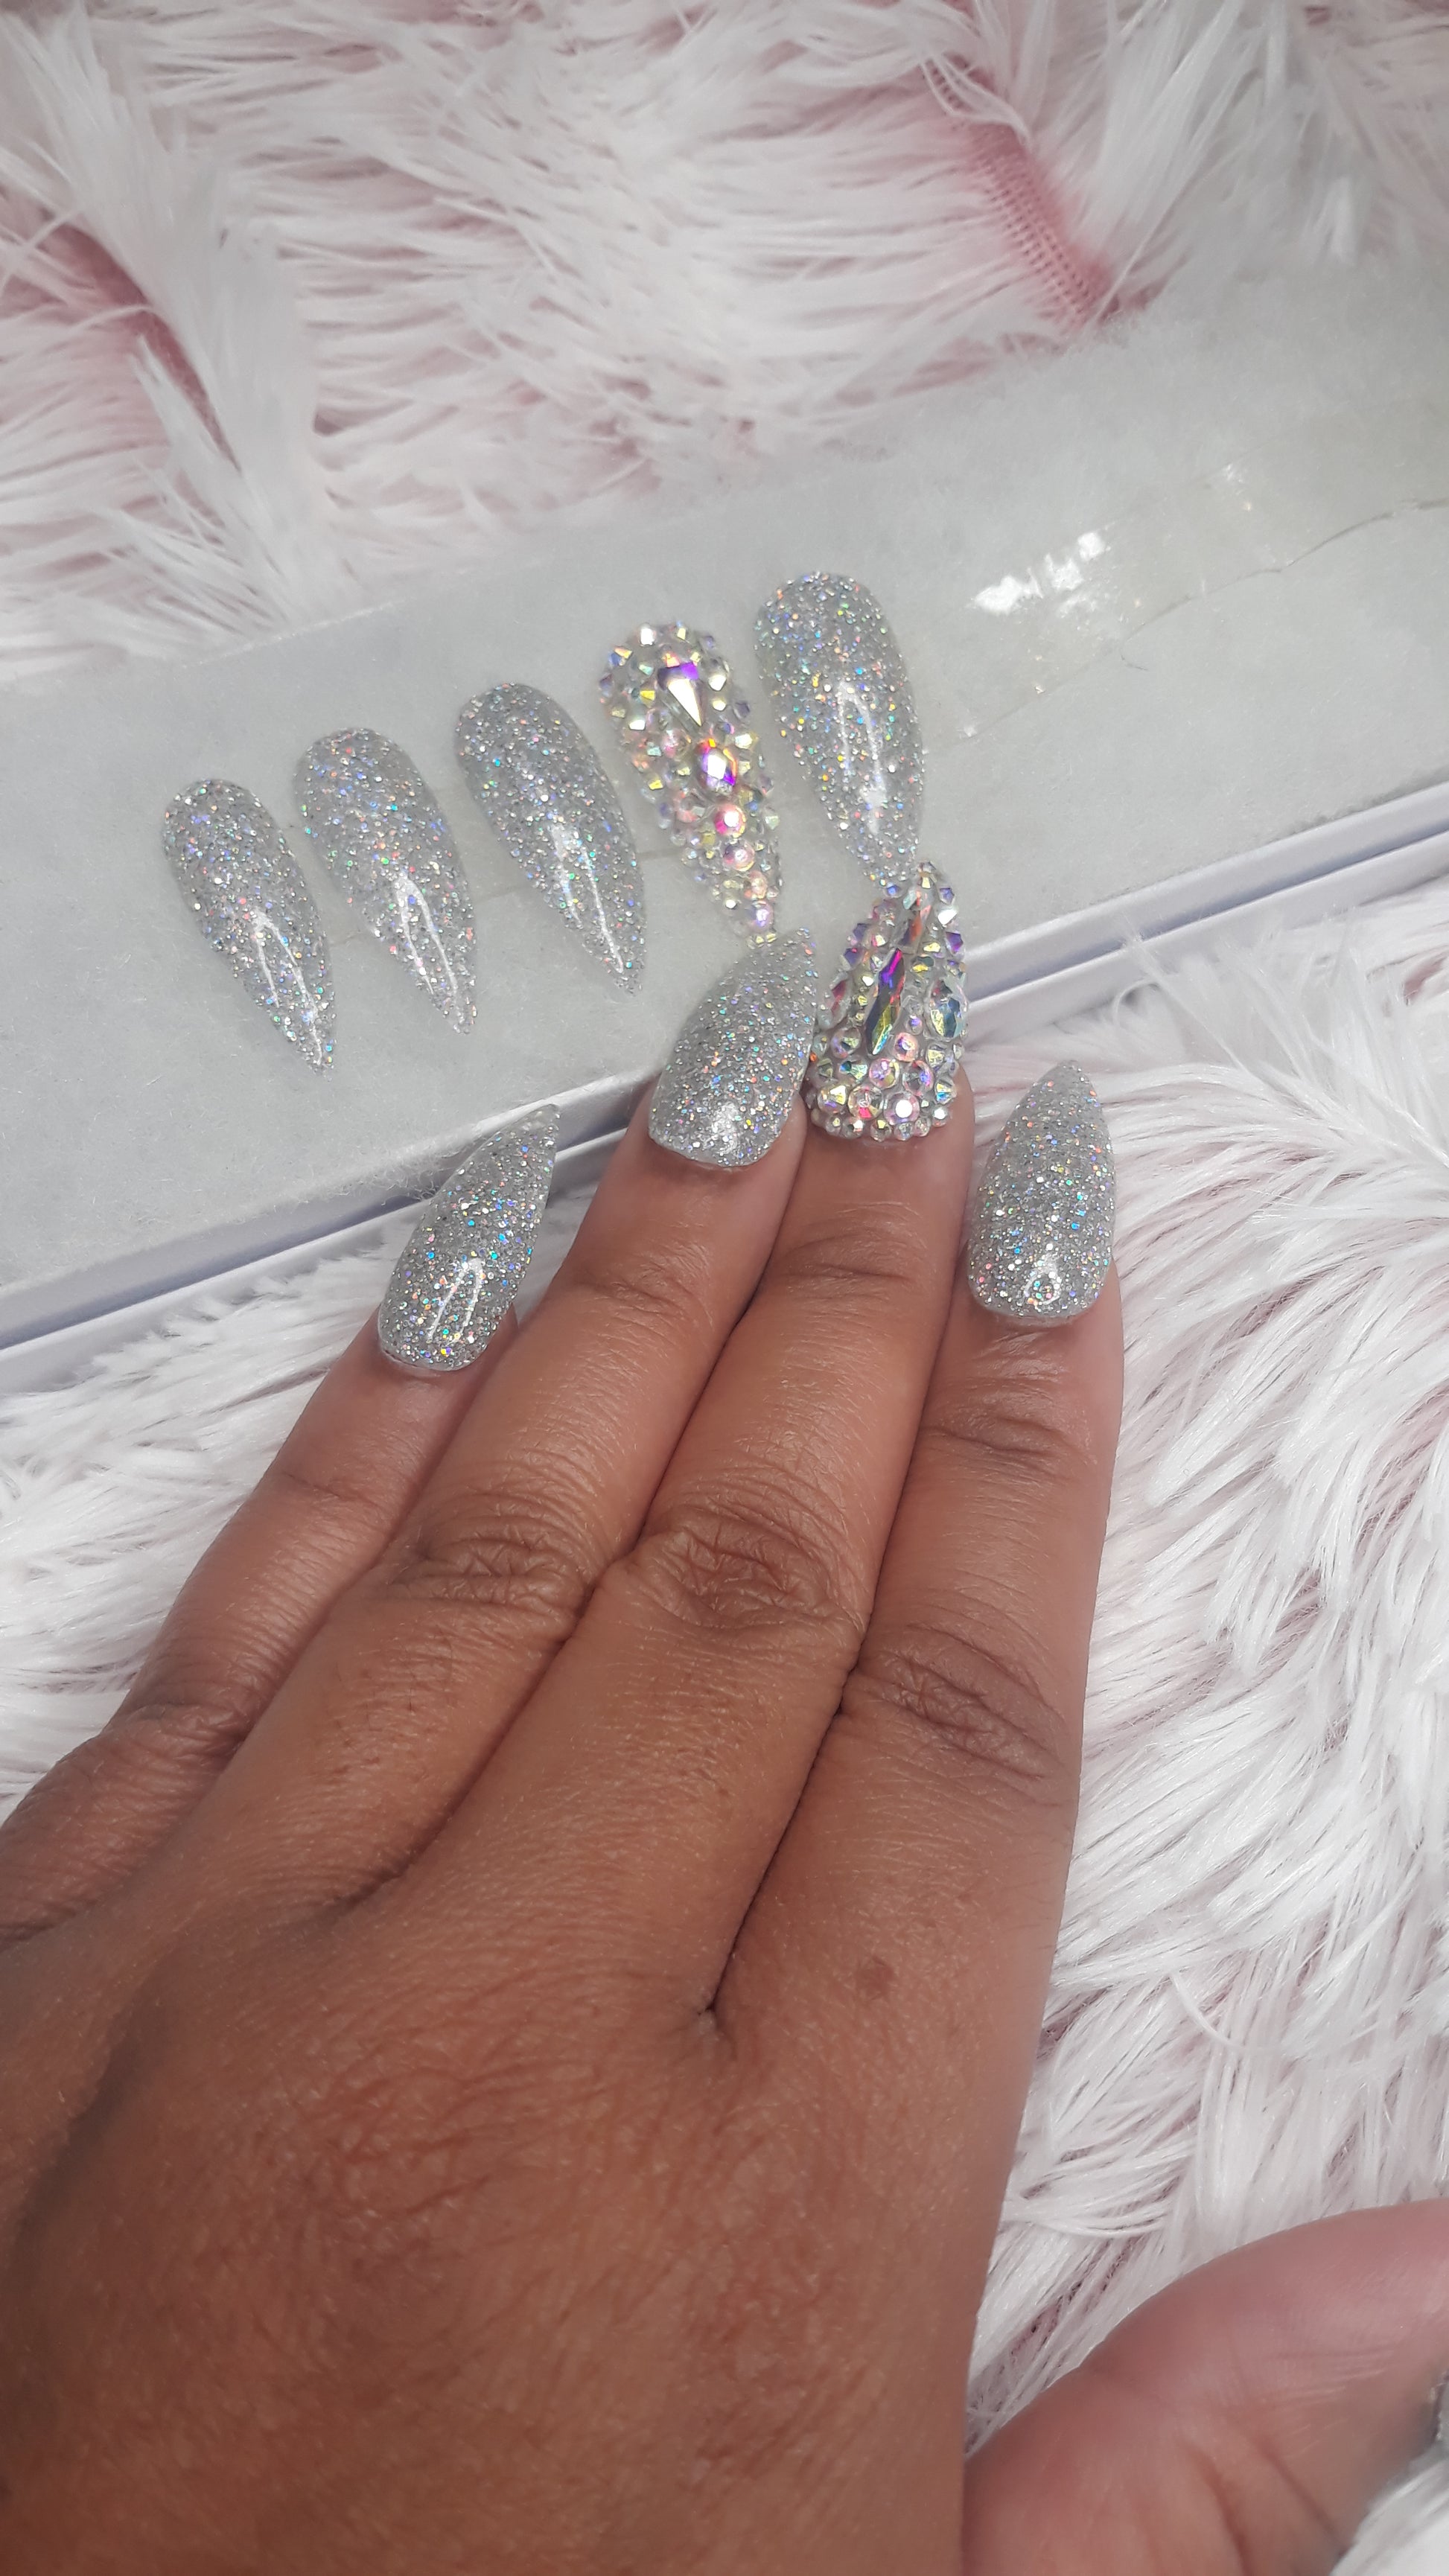 Silver Glitter Coffin Press On Nails – She's A Beat Beauty